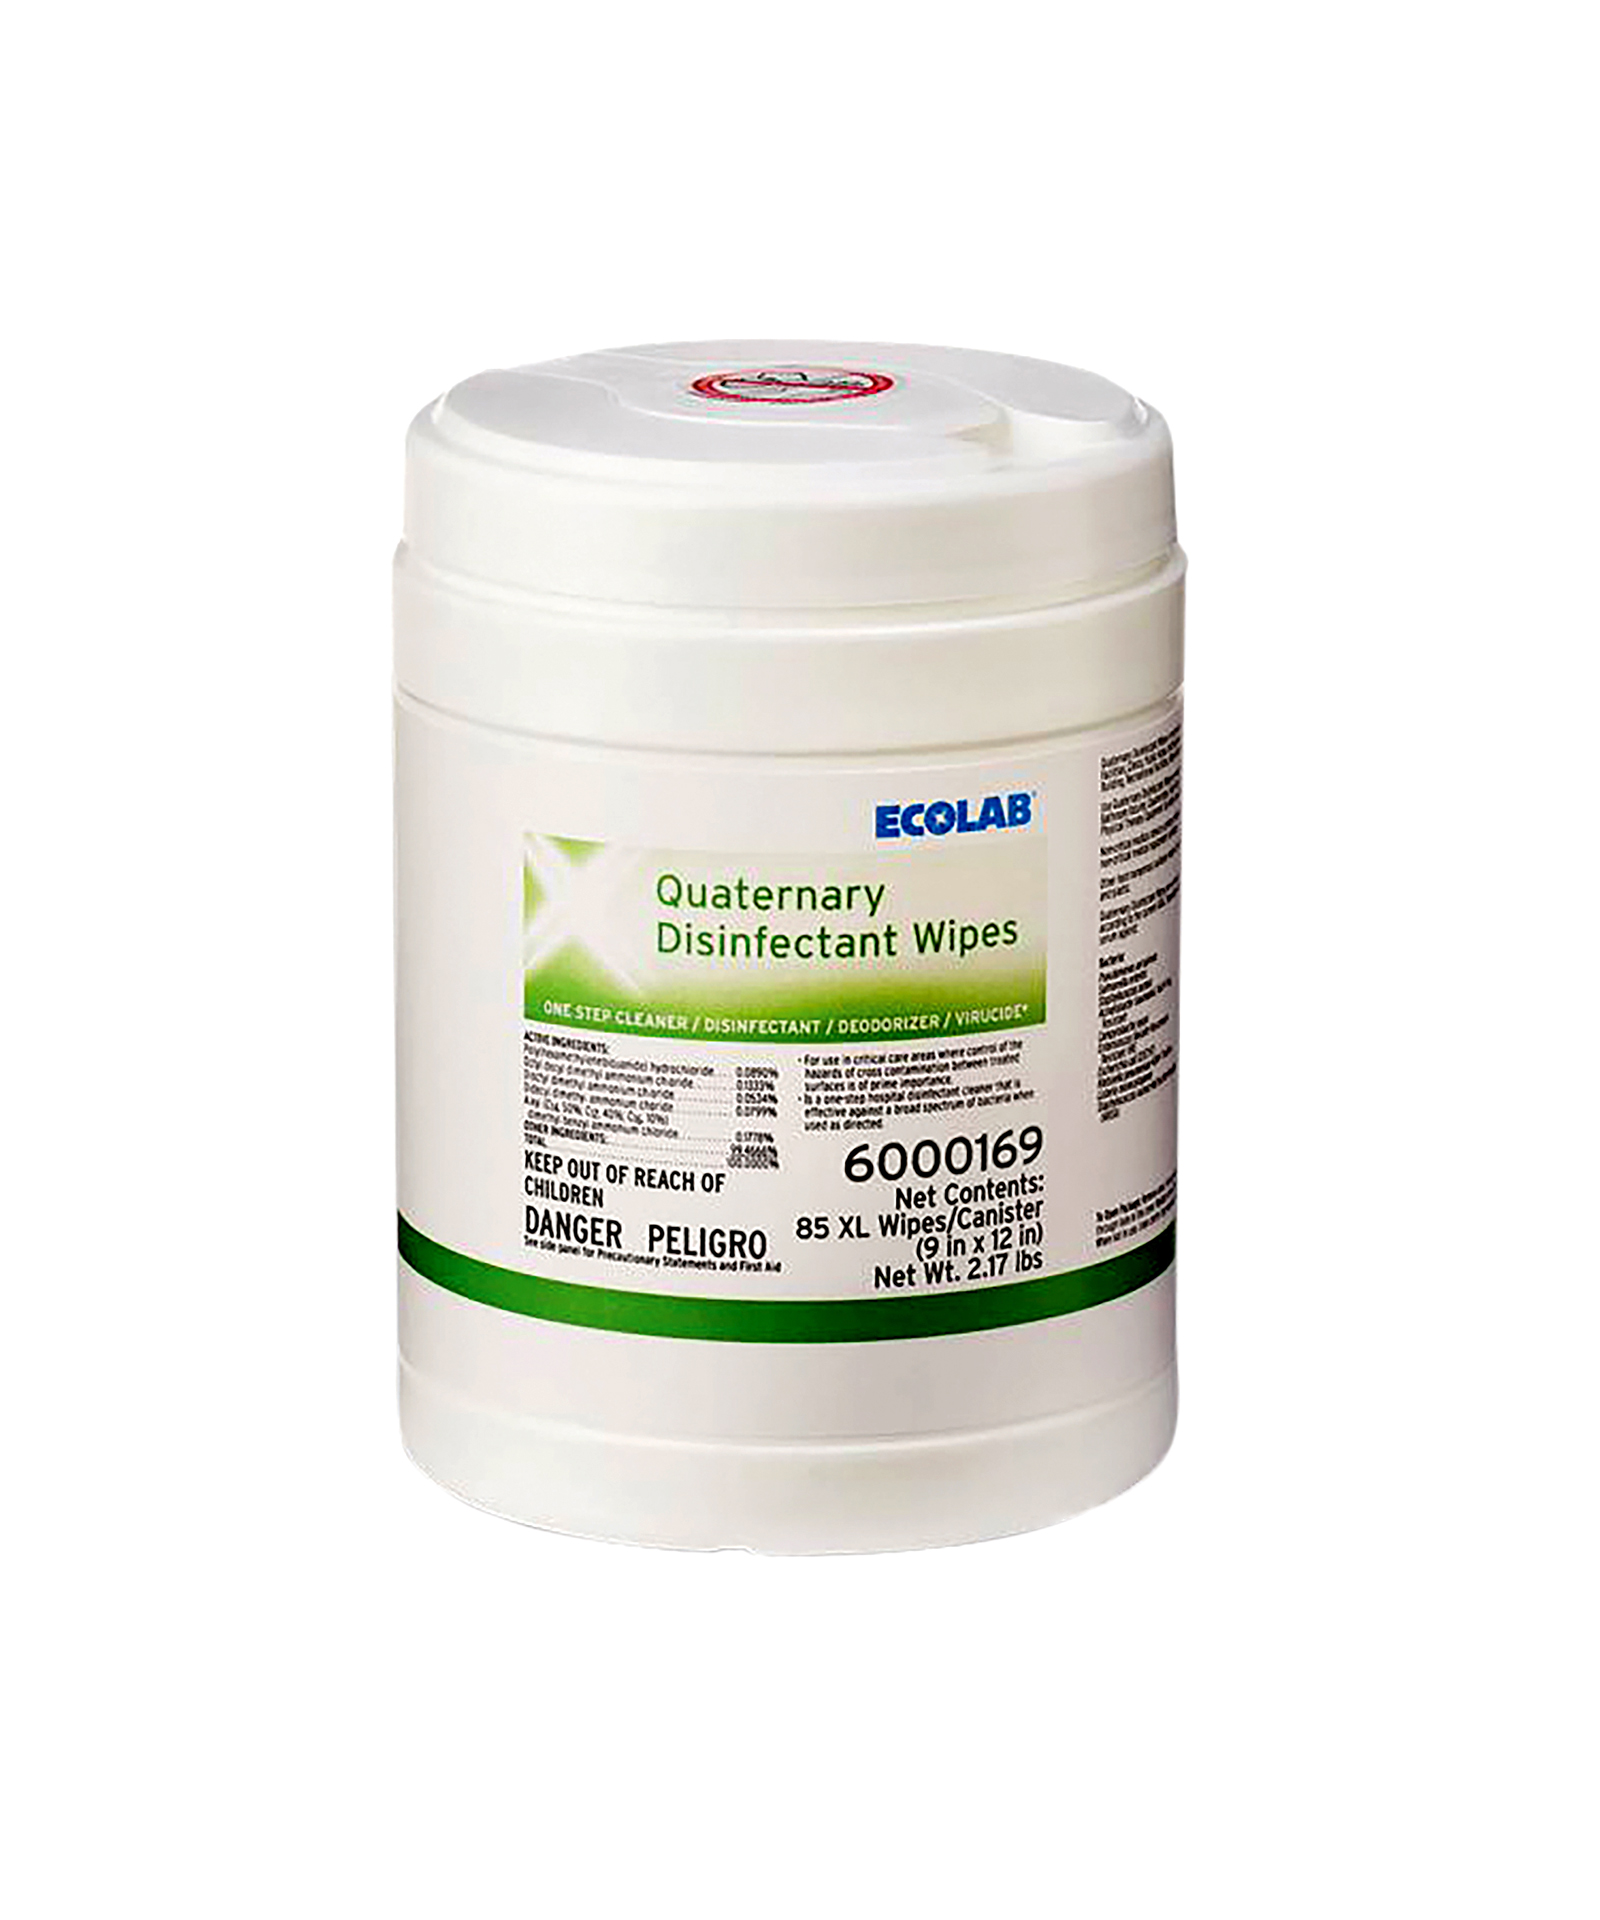 QUATERNARY DISINFECTANT WIPES